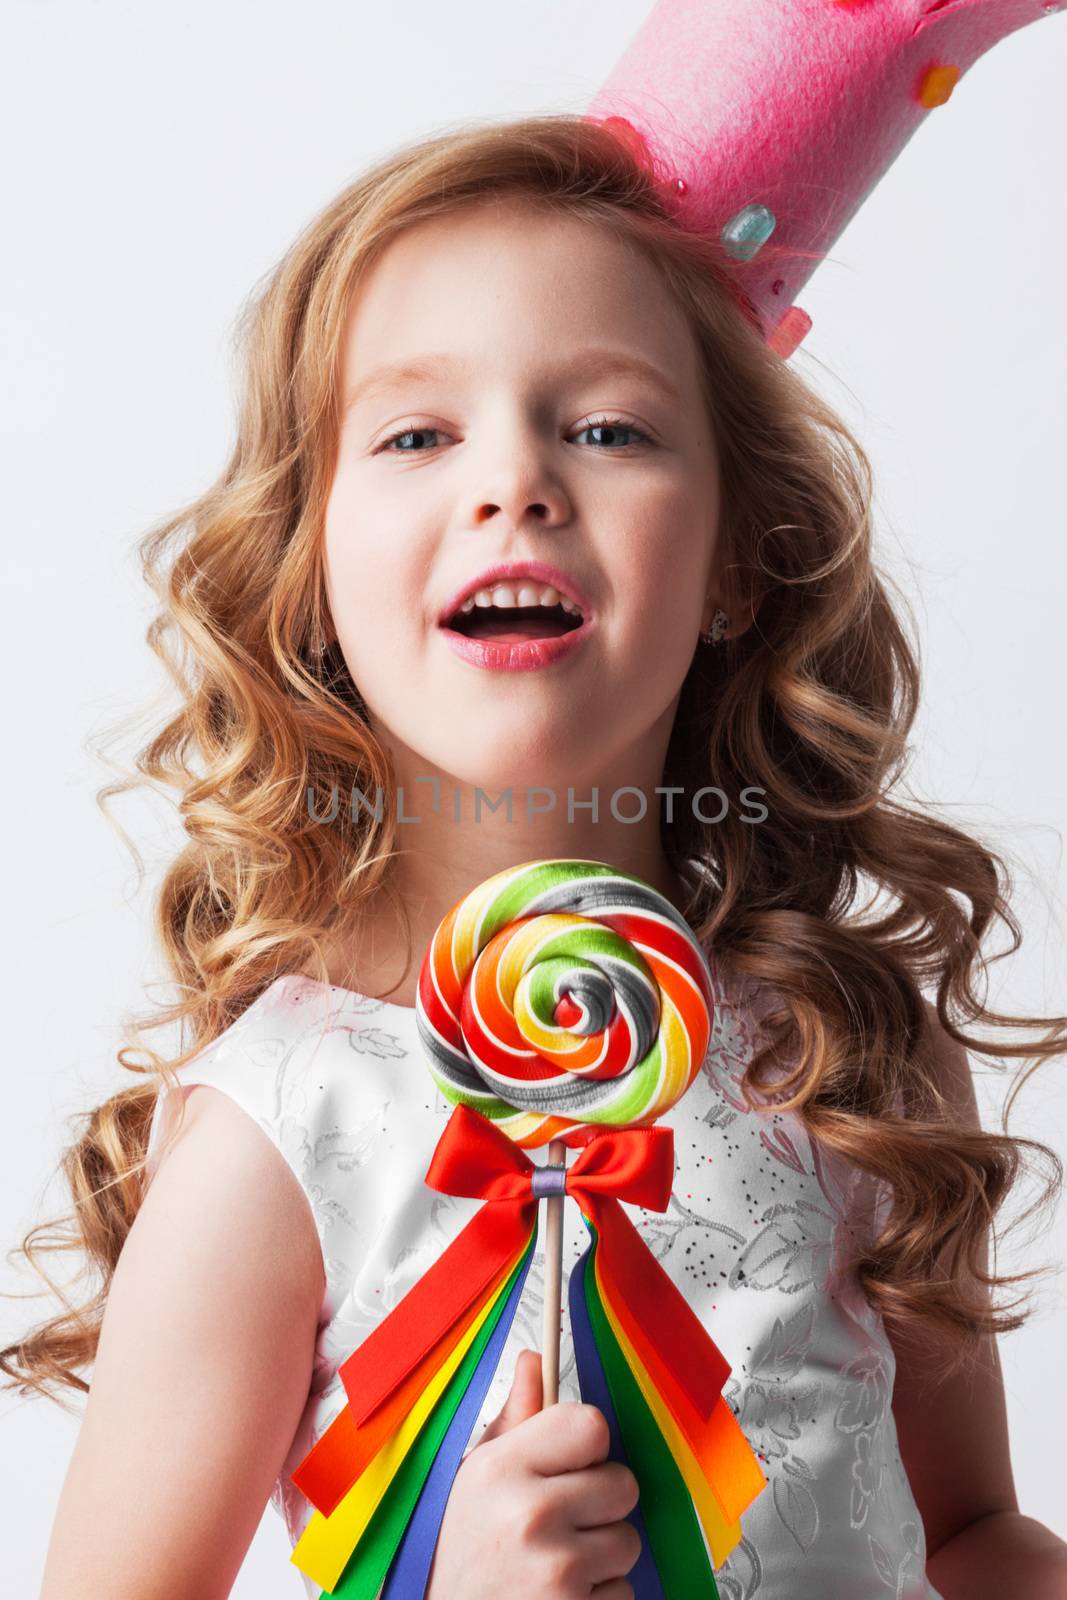 Beautiful excited candy princess girl in crown holding big lollipop